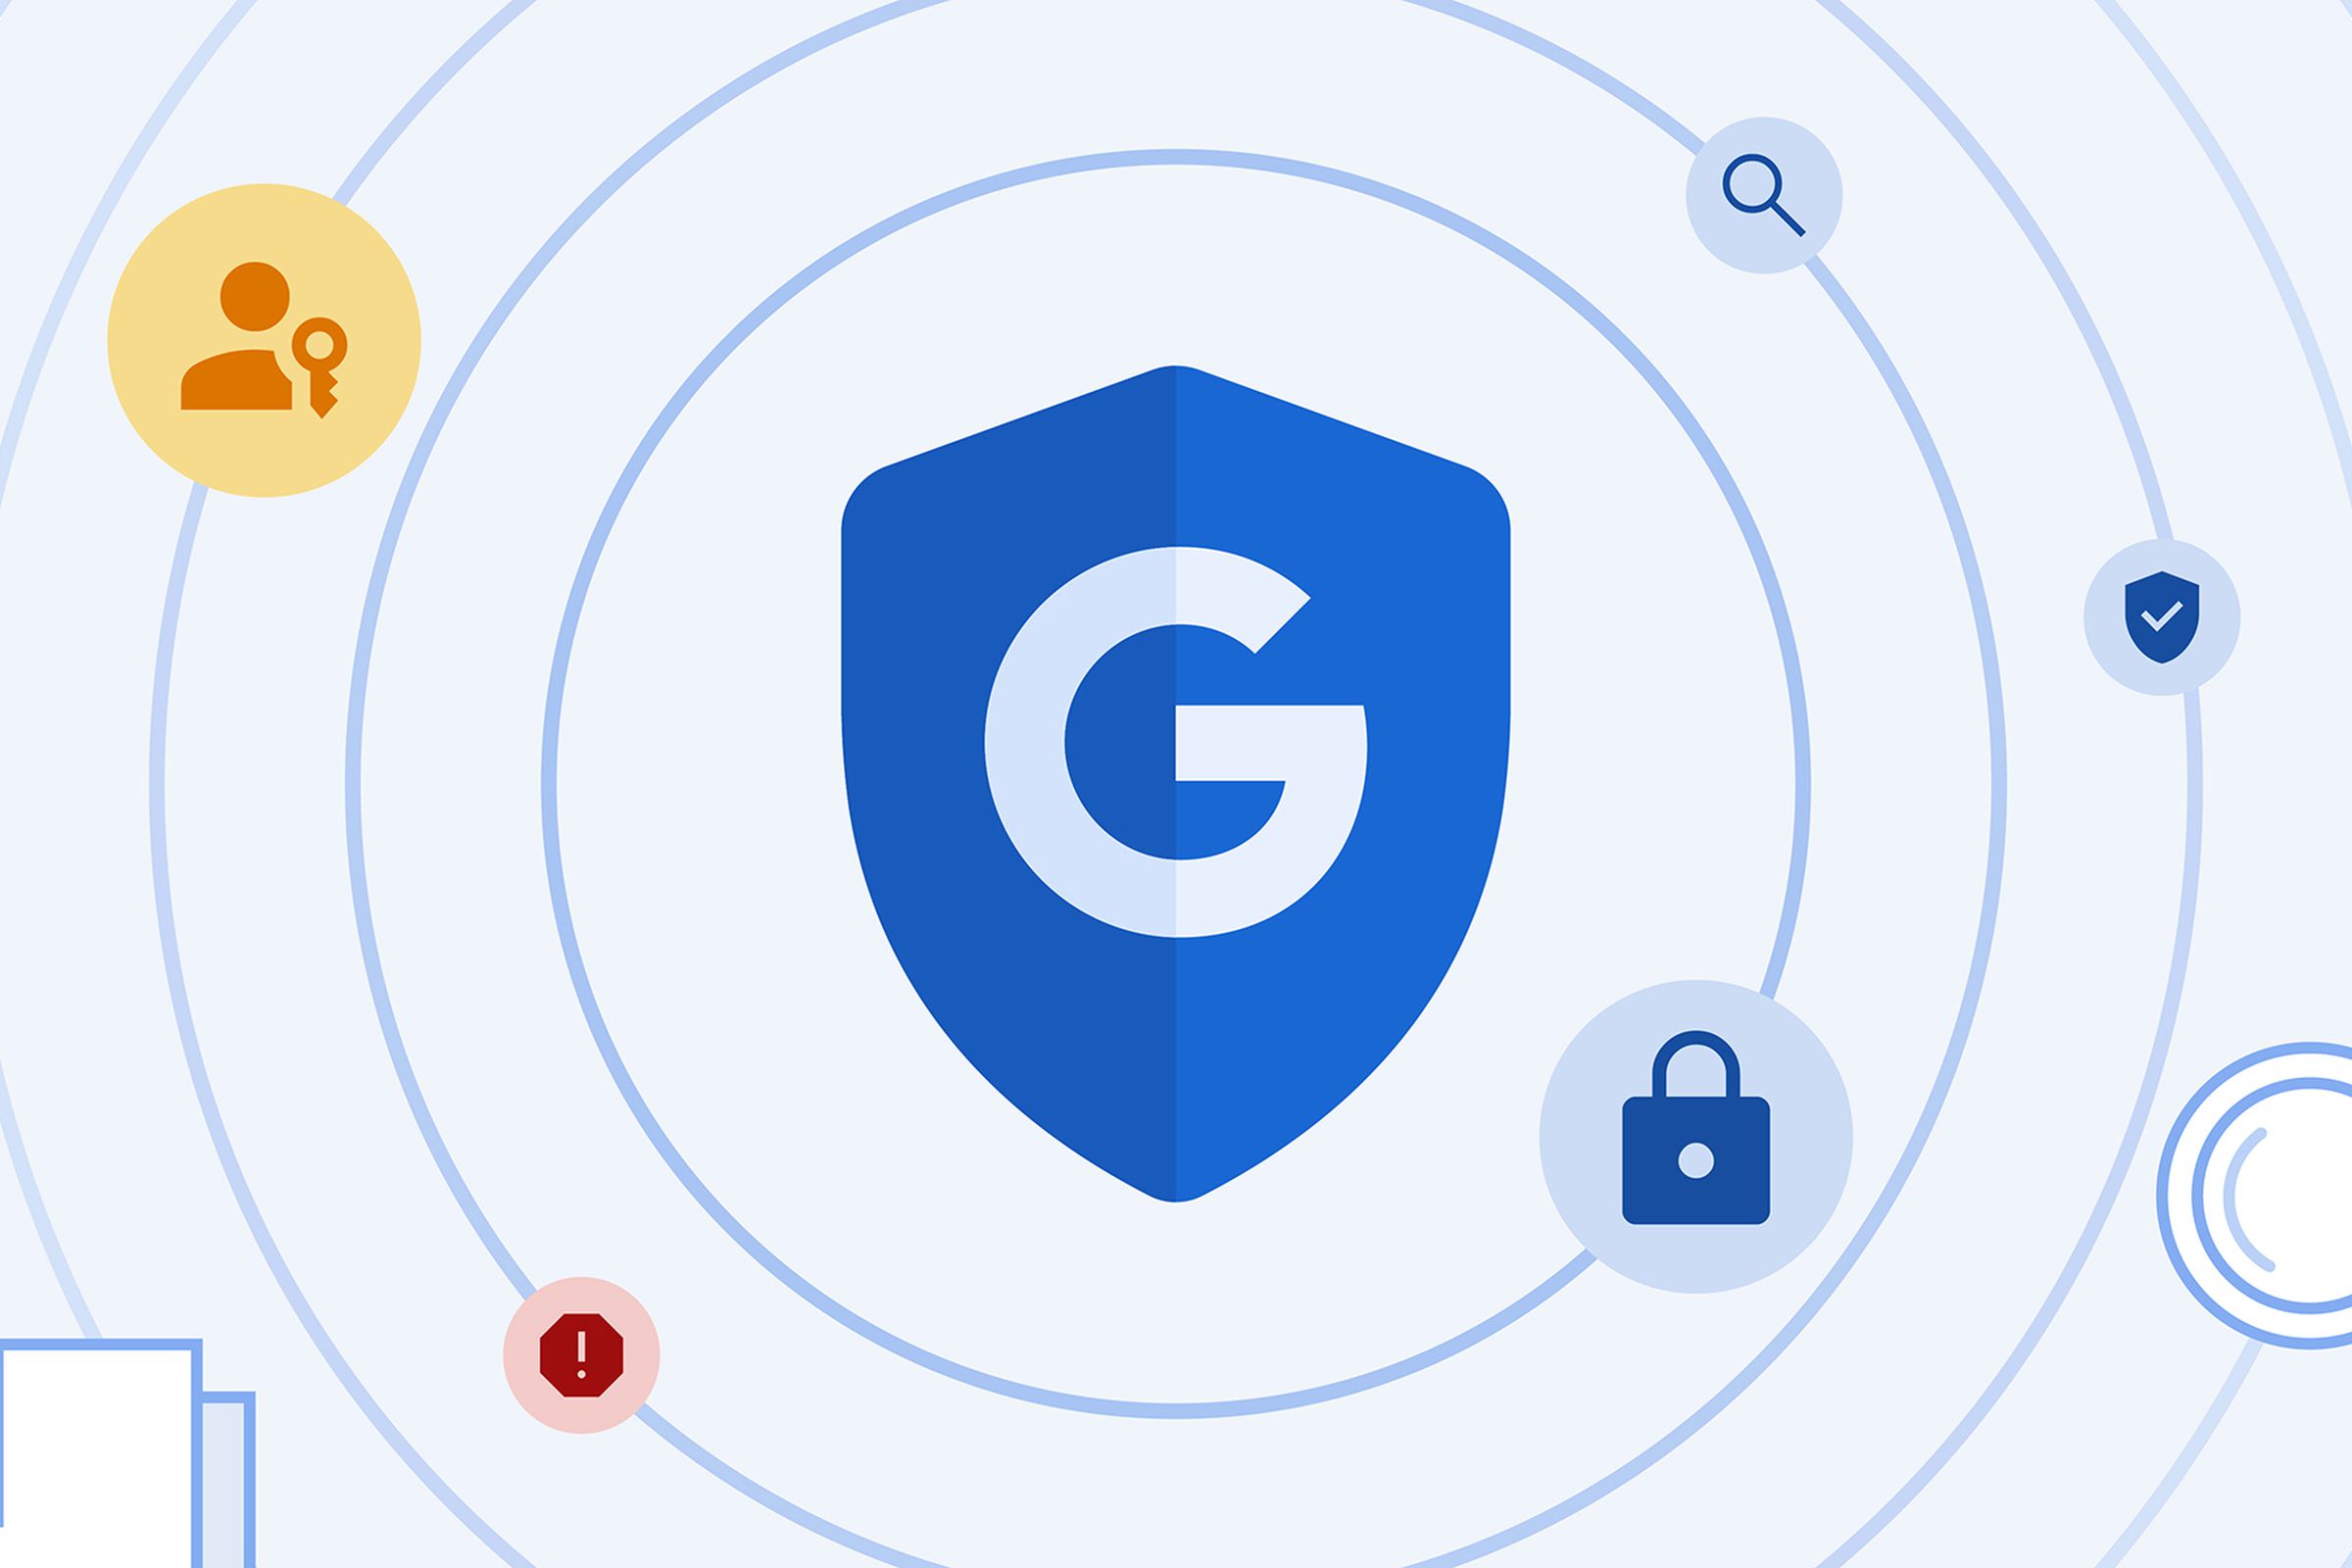 The Google logo in a shield, surrounded by security-themed illustrations.